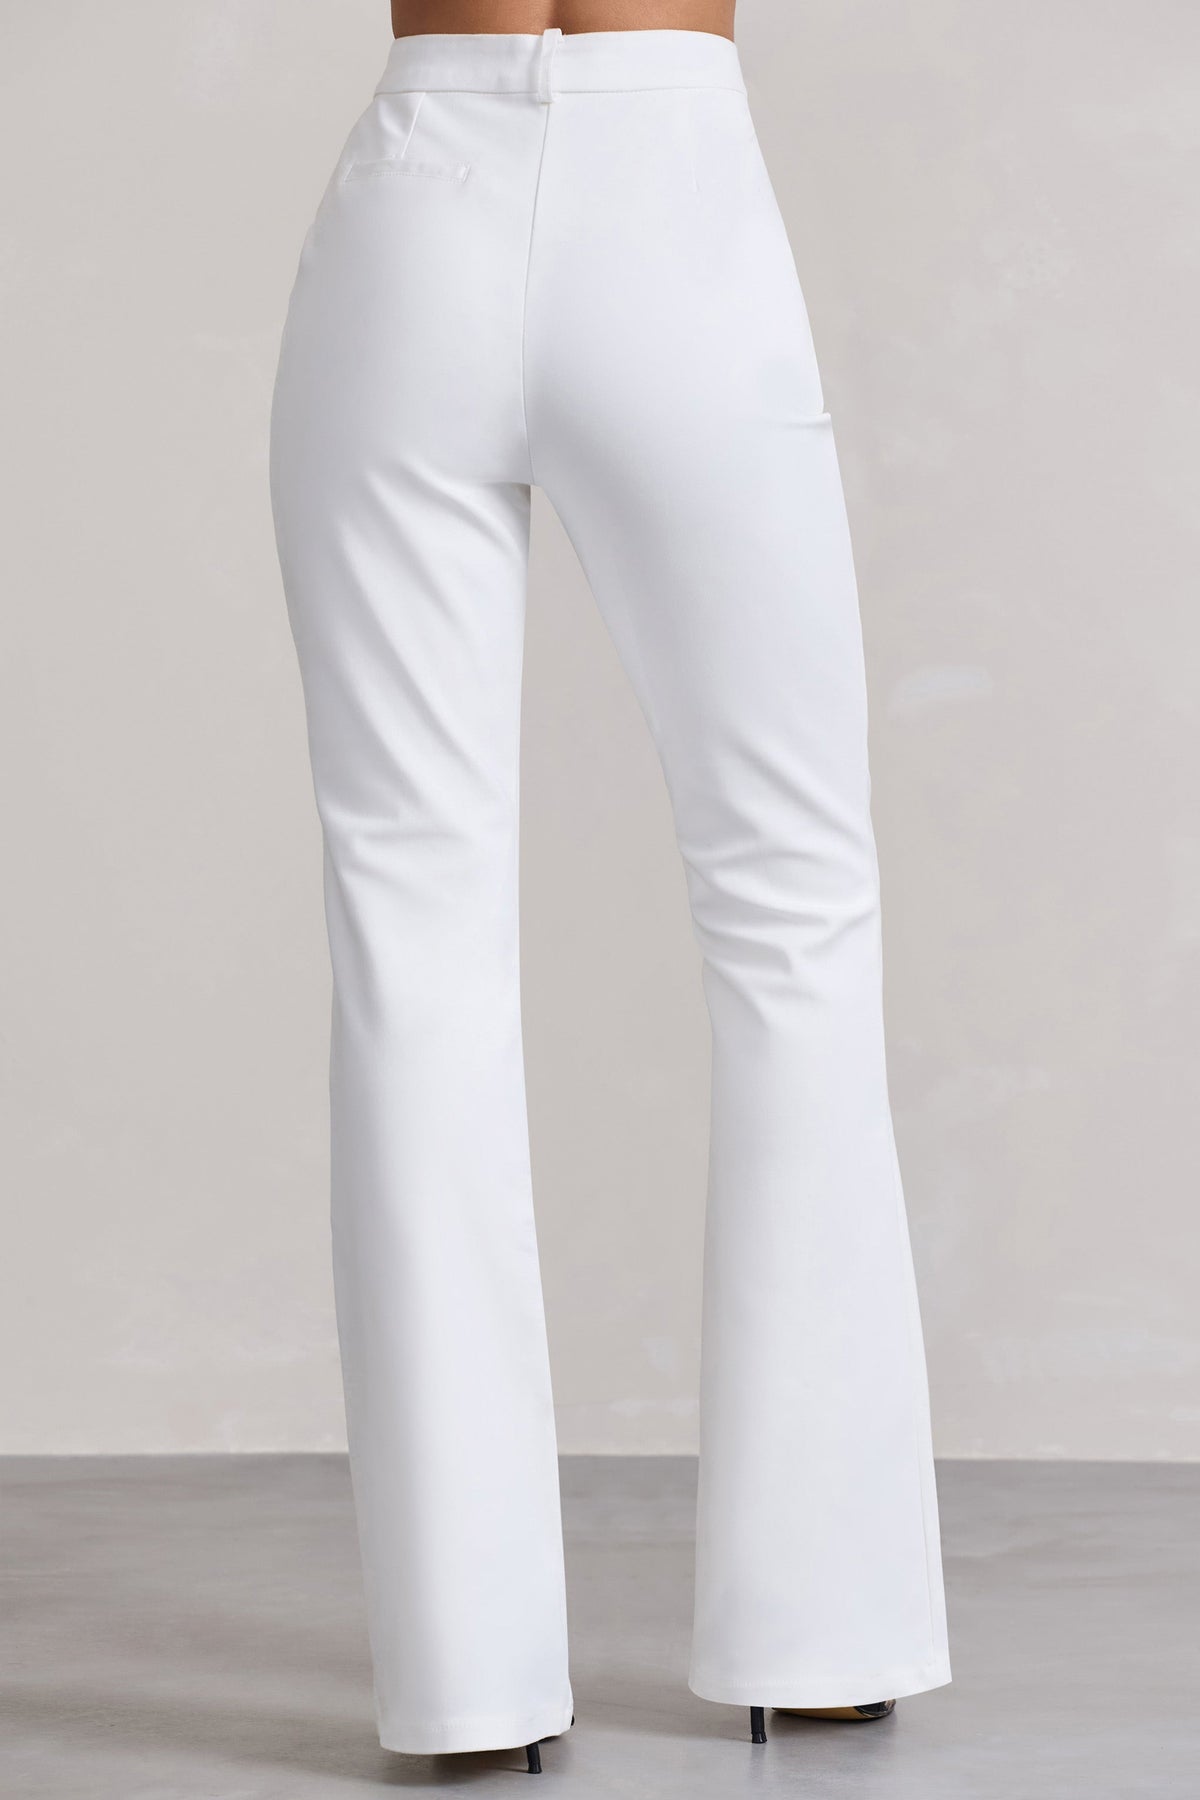 High Waist White Flare Pants, Pants for Women, Office Meeting Pants, White  Formal Pants, Trousers Women - Etsy